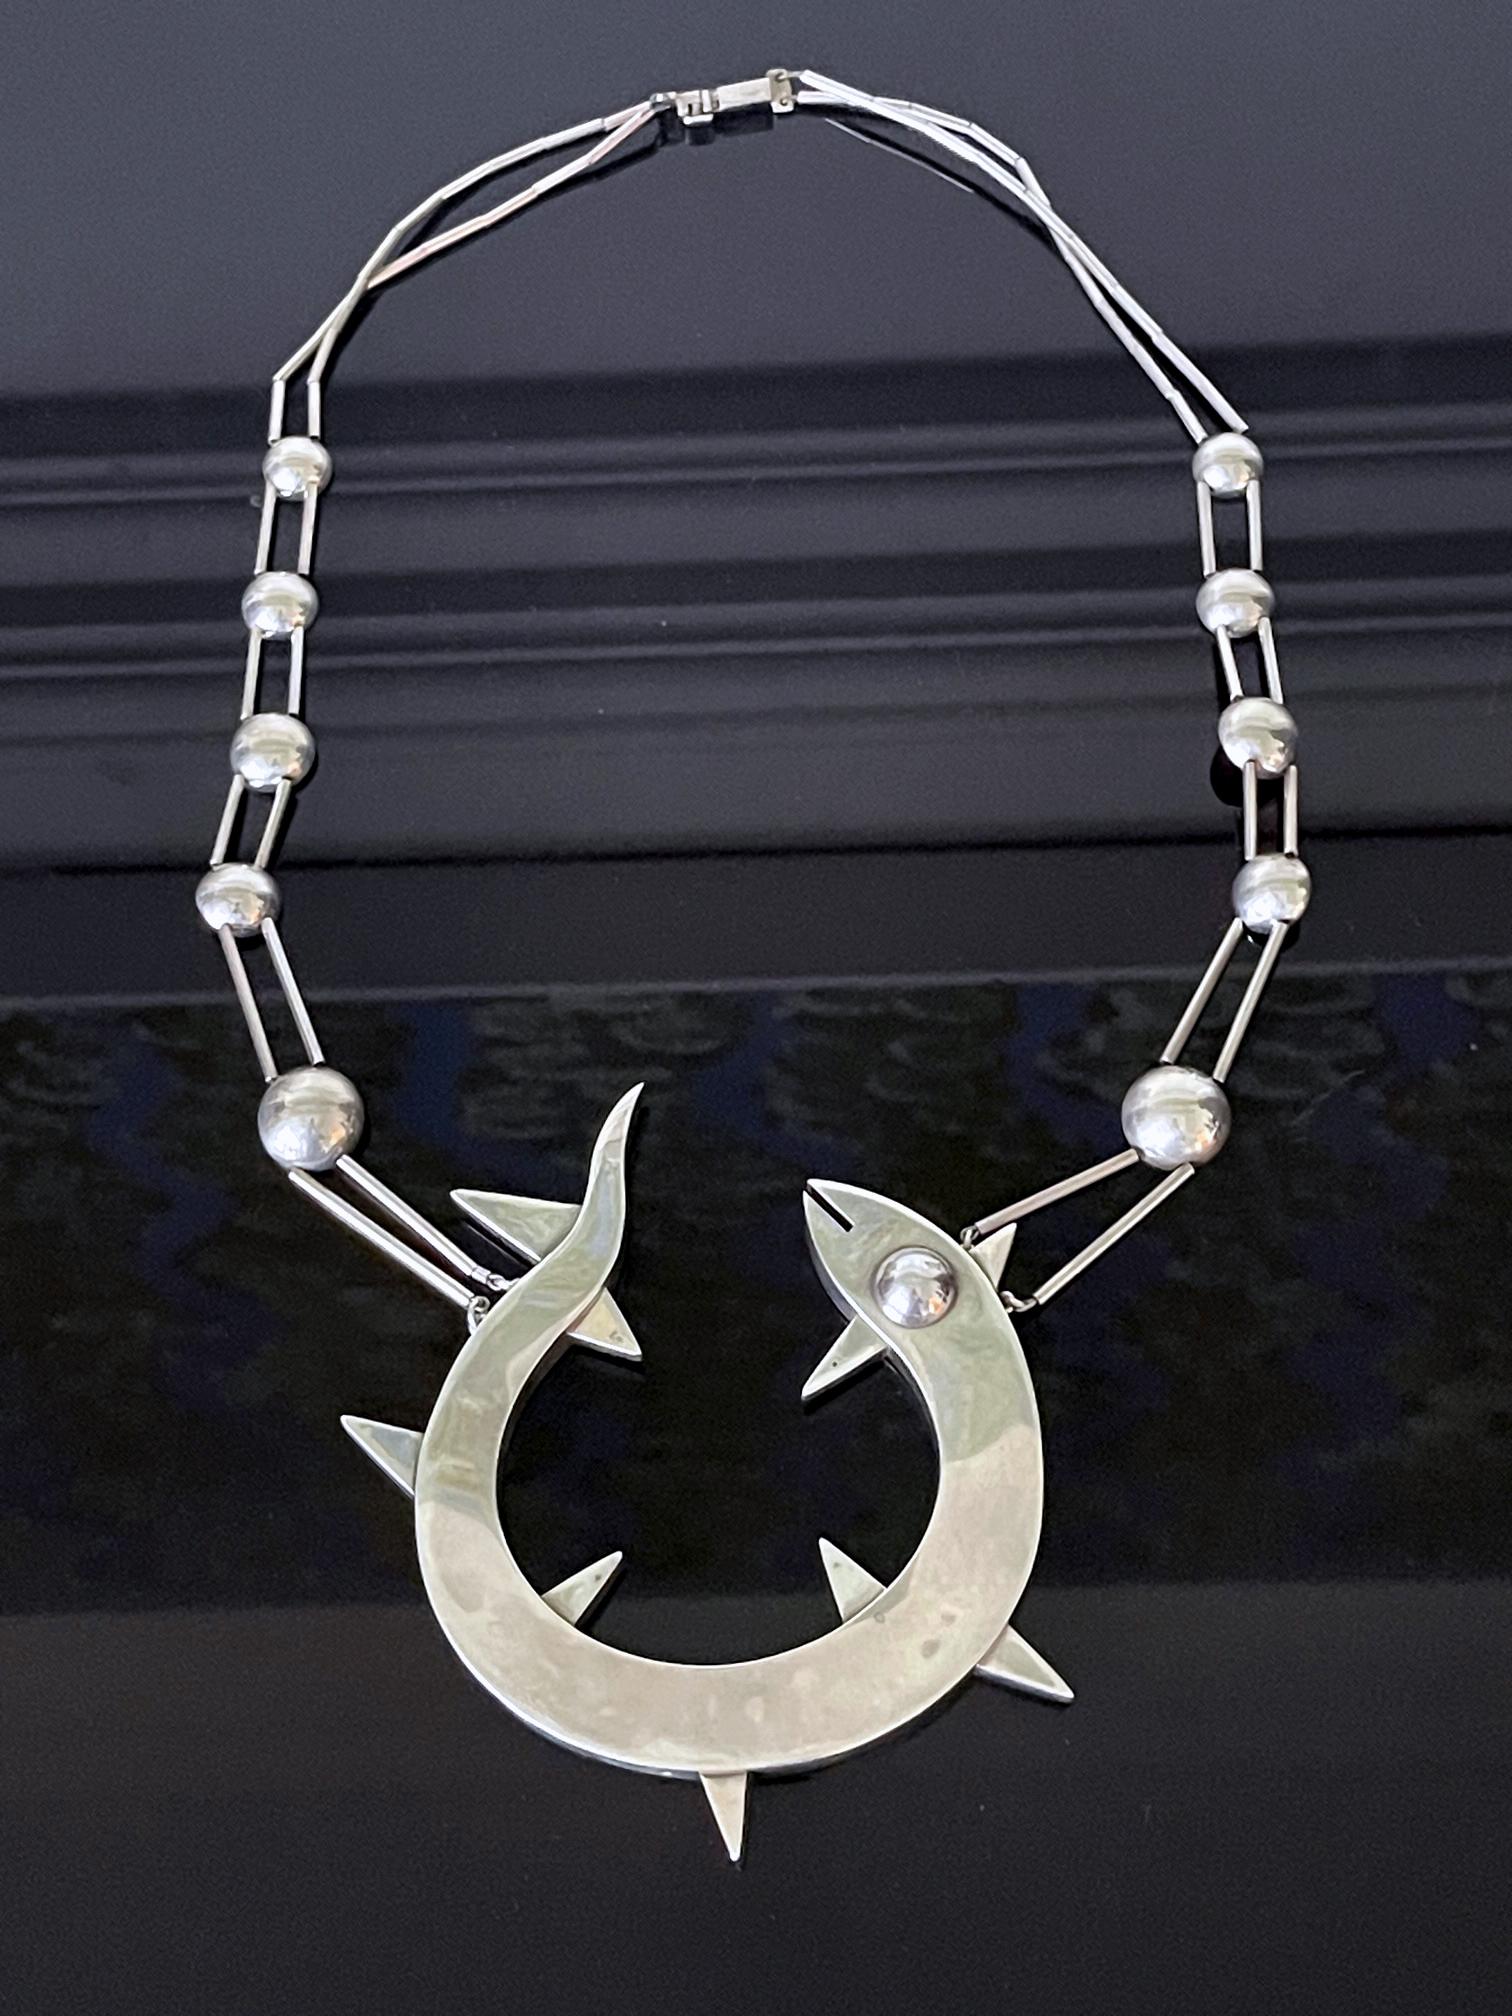 A highly sculptural sterling silver necklace by Peruvian silversmith and designer Grazielle Laffi (1923-2009), Lima, circa 1970. Marks to necklace: PERU, 950. The necklace has a very modern appearance and features an articulate chain links made of